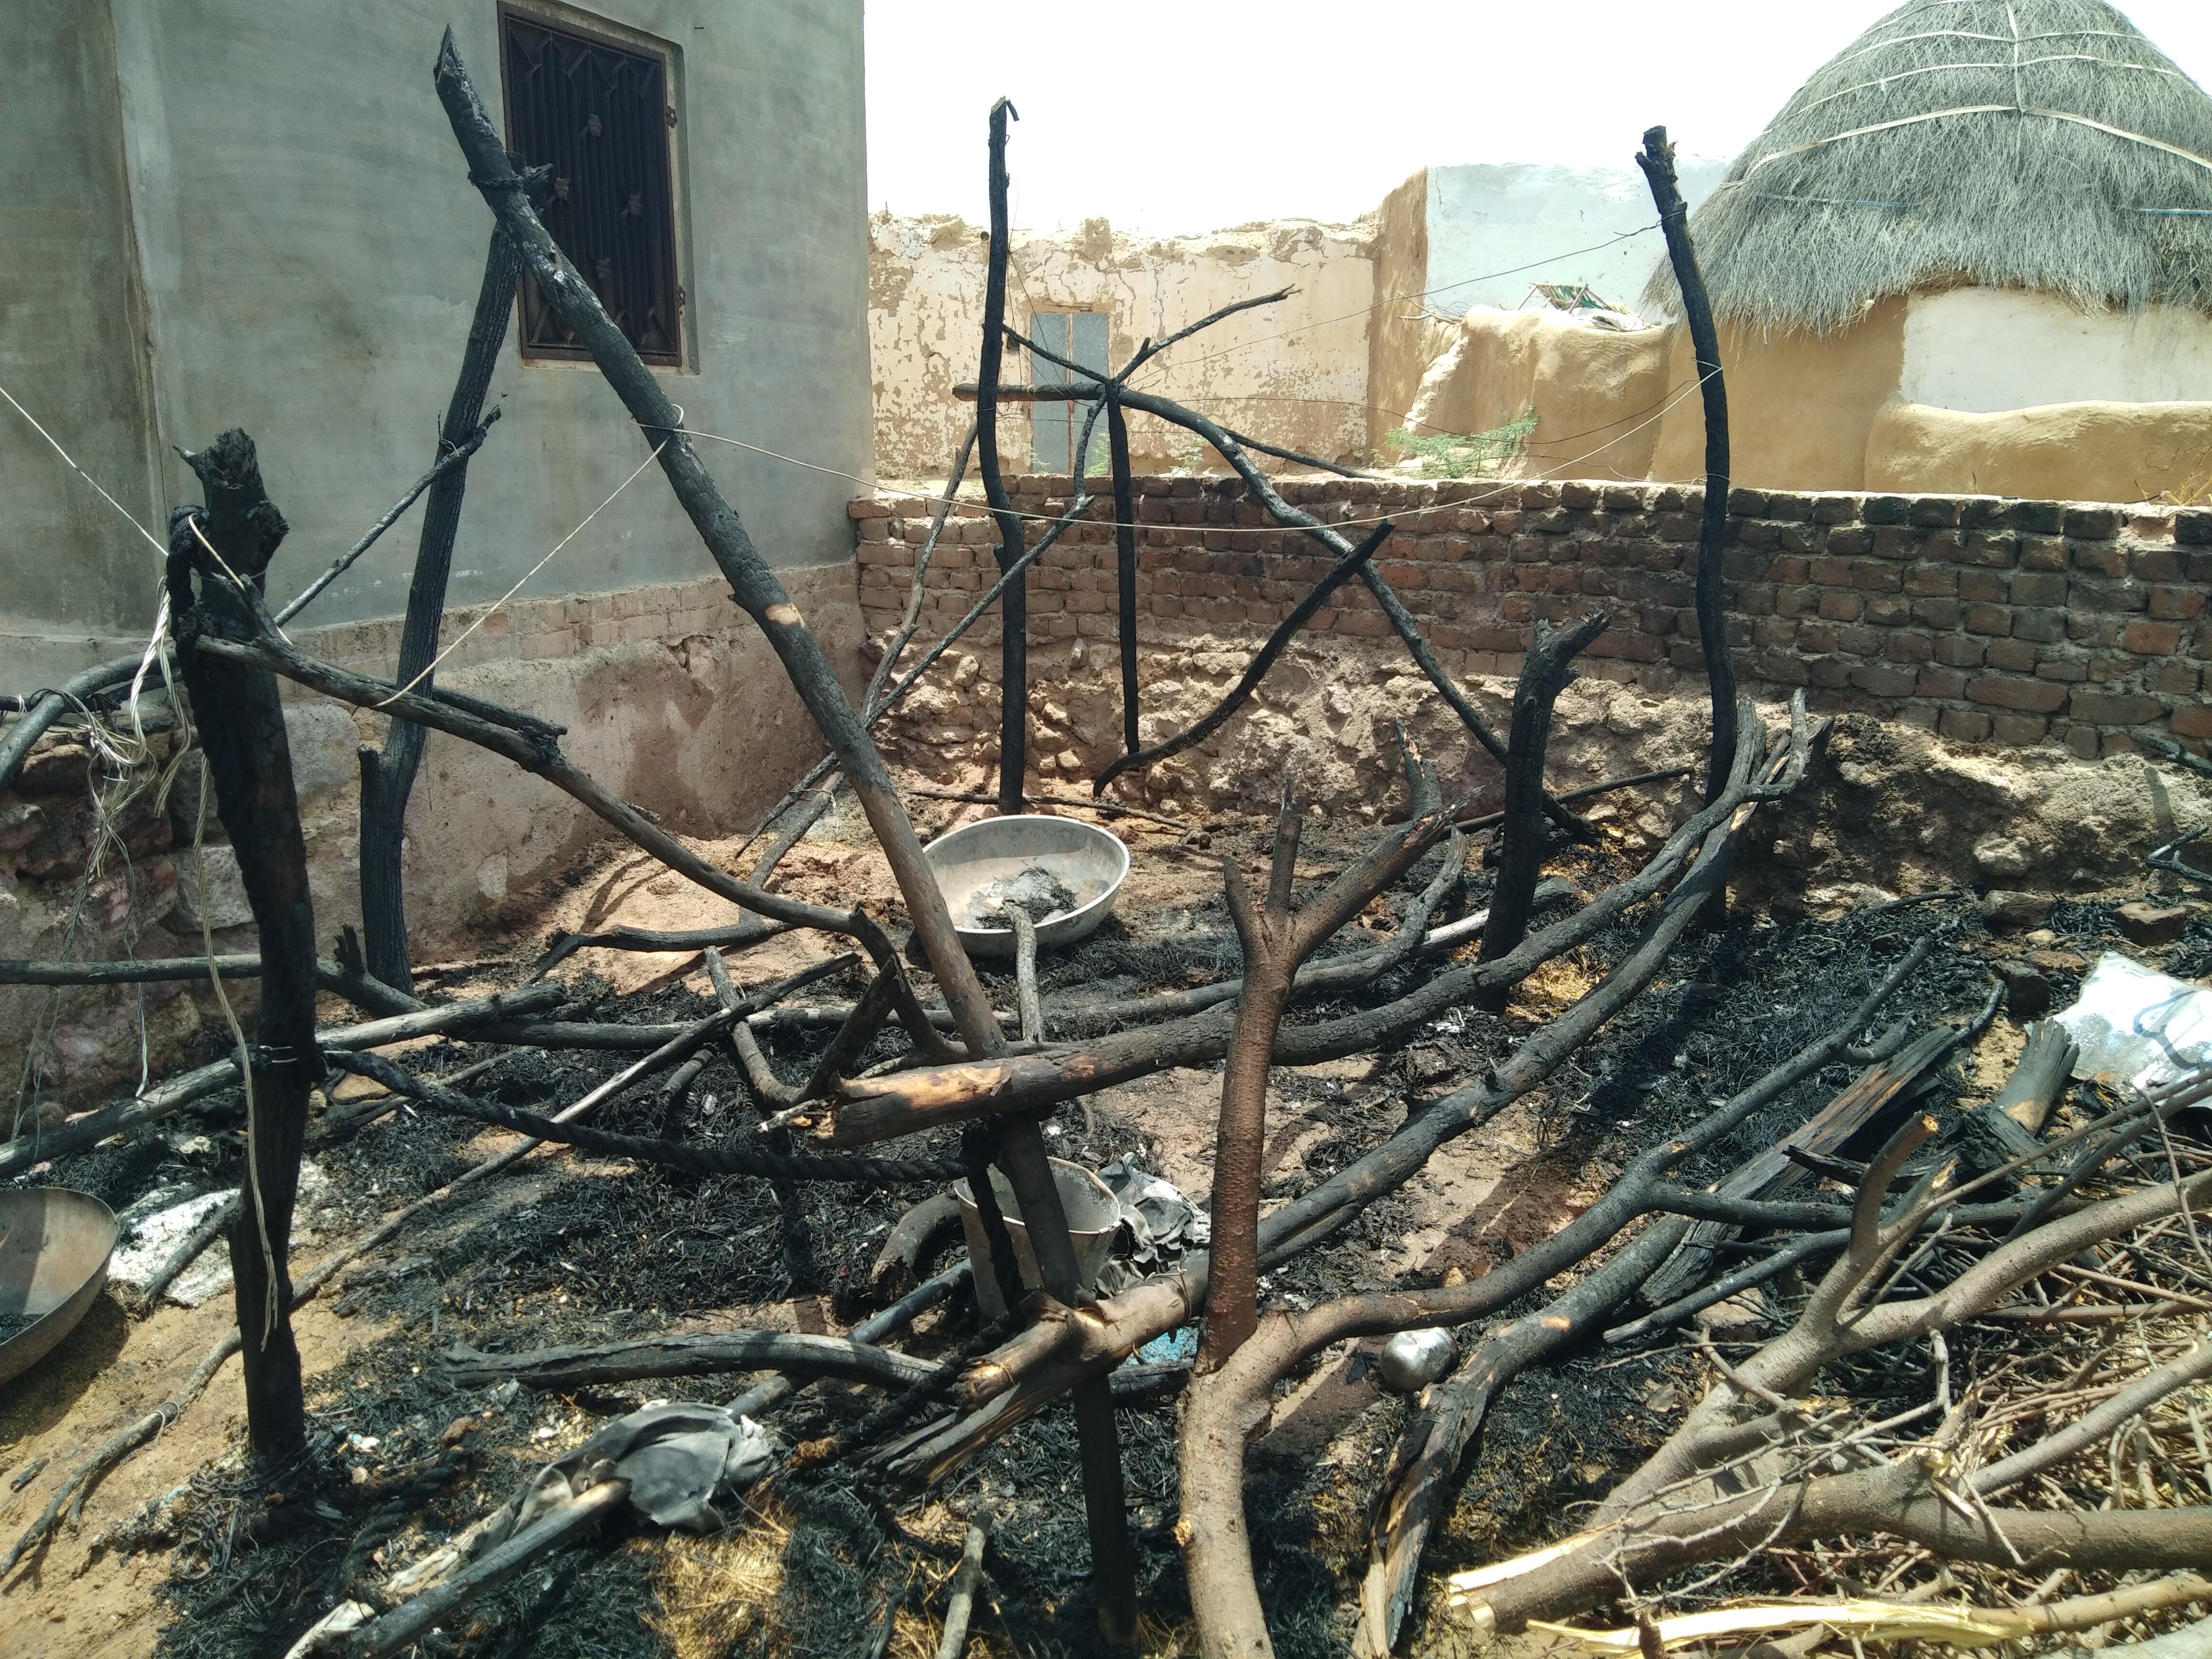 The cow died by fire in the huts, the goats scorched Household goods,